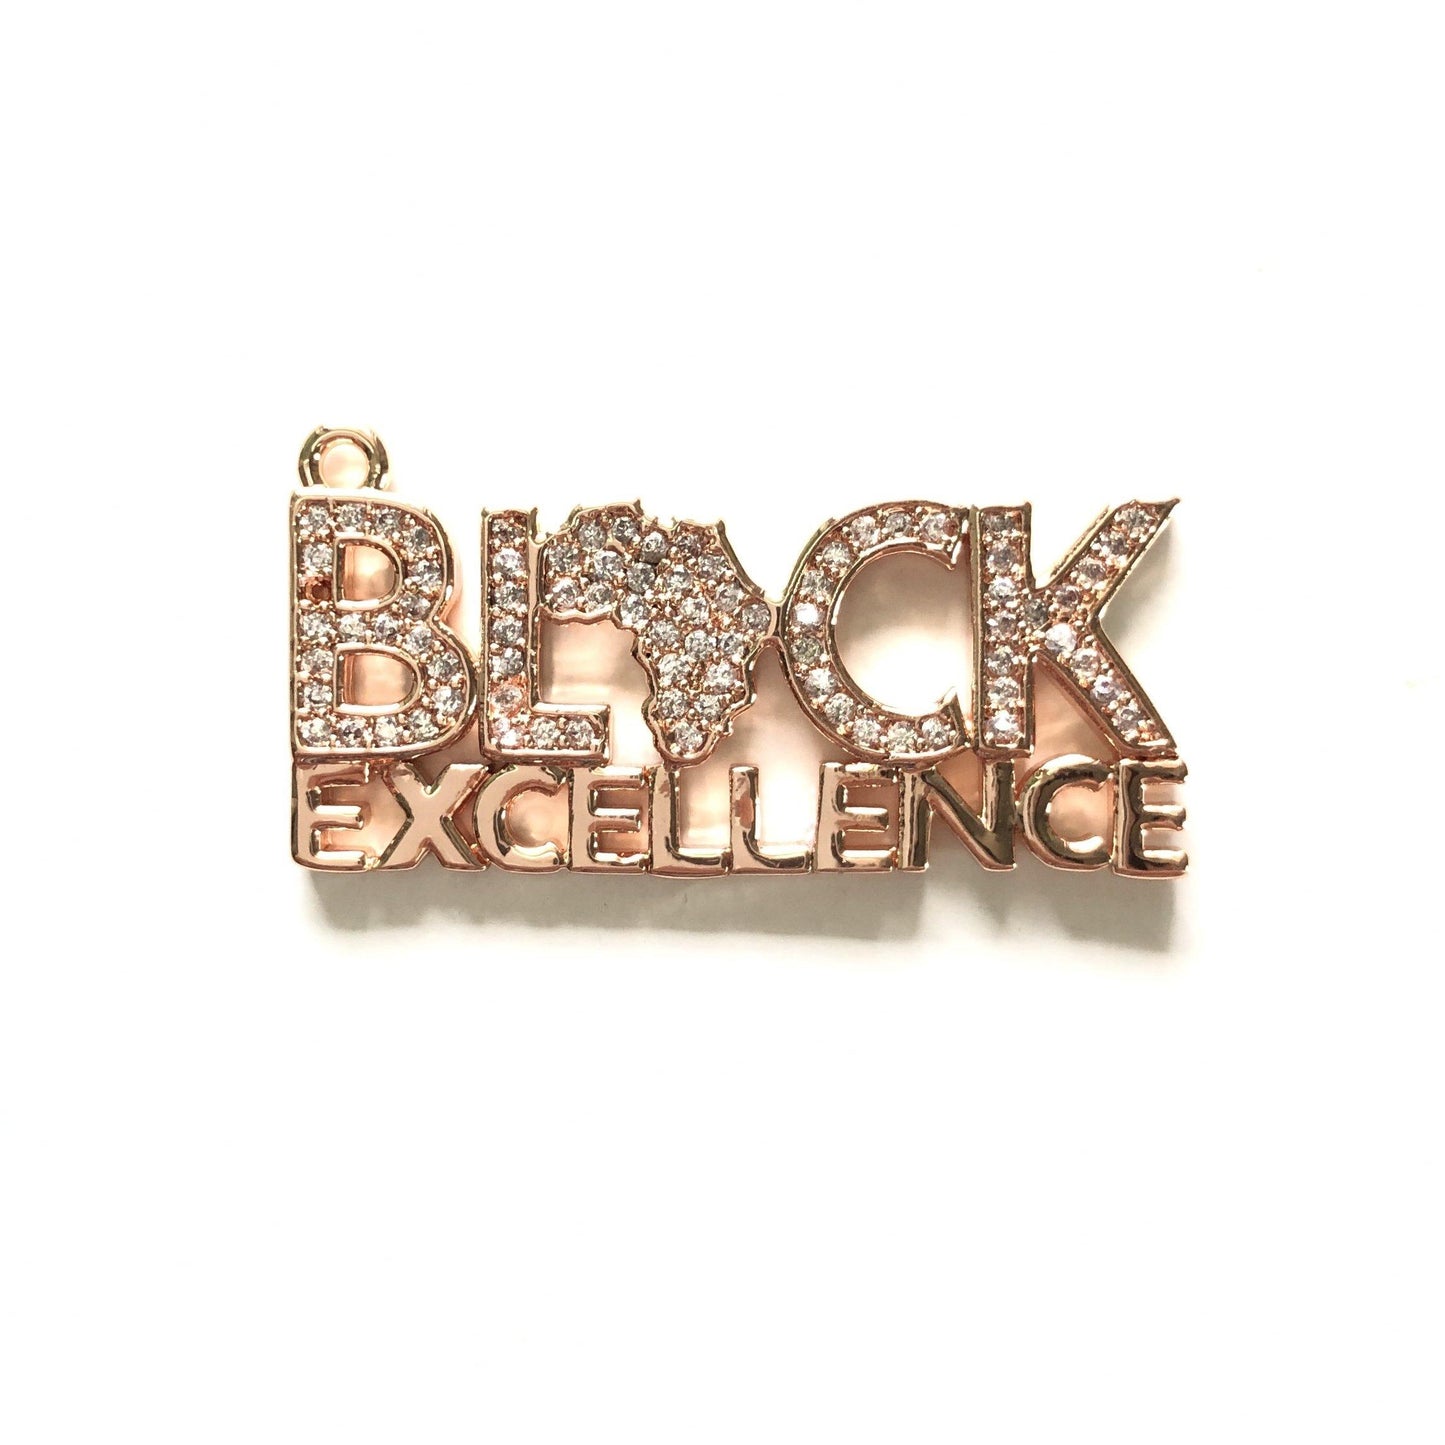 10pcs/lot 34.5*15mm CZ Paved Black Excellence Charms Black History Month Juneteenth Awareness Rose Gold CZ Paved Charms Juneteenth & Black History Month Awareness Words & Quotes Charms Beads Beyond